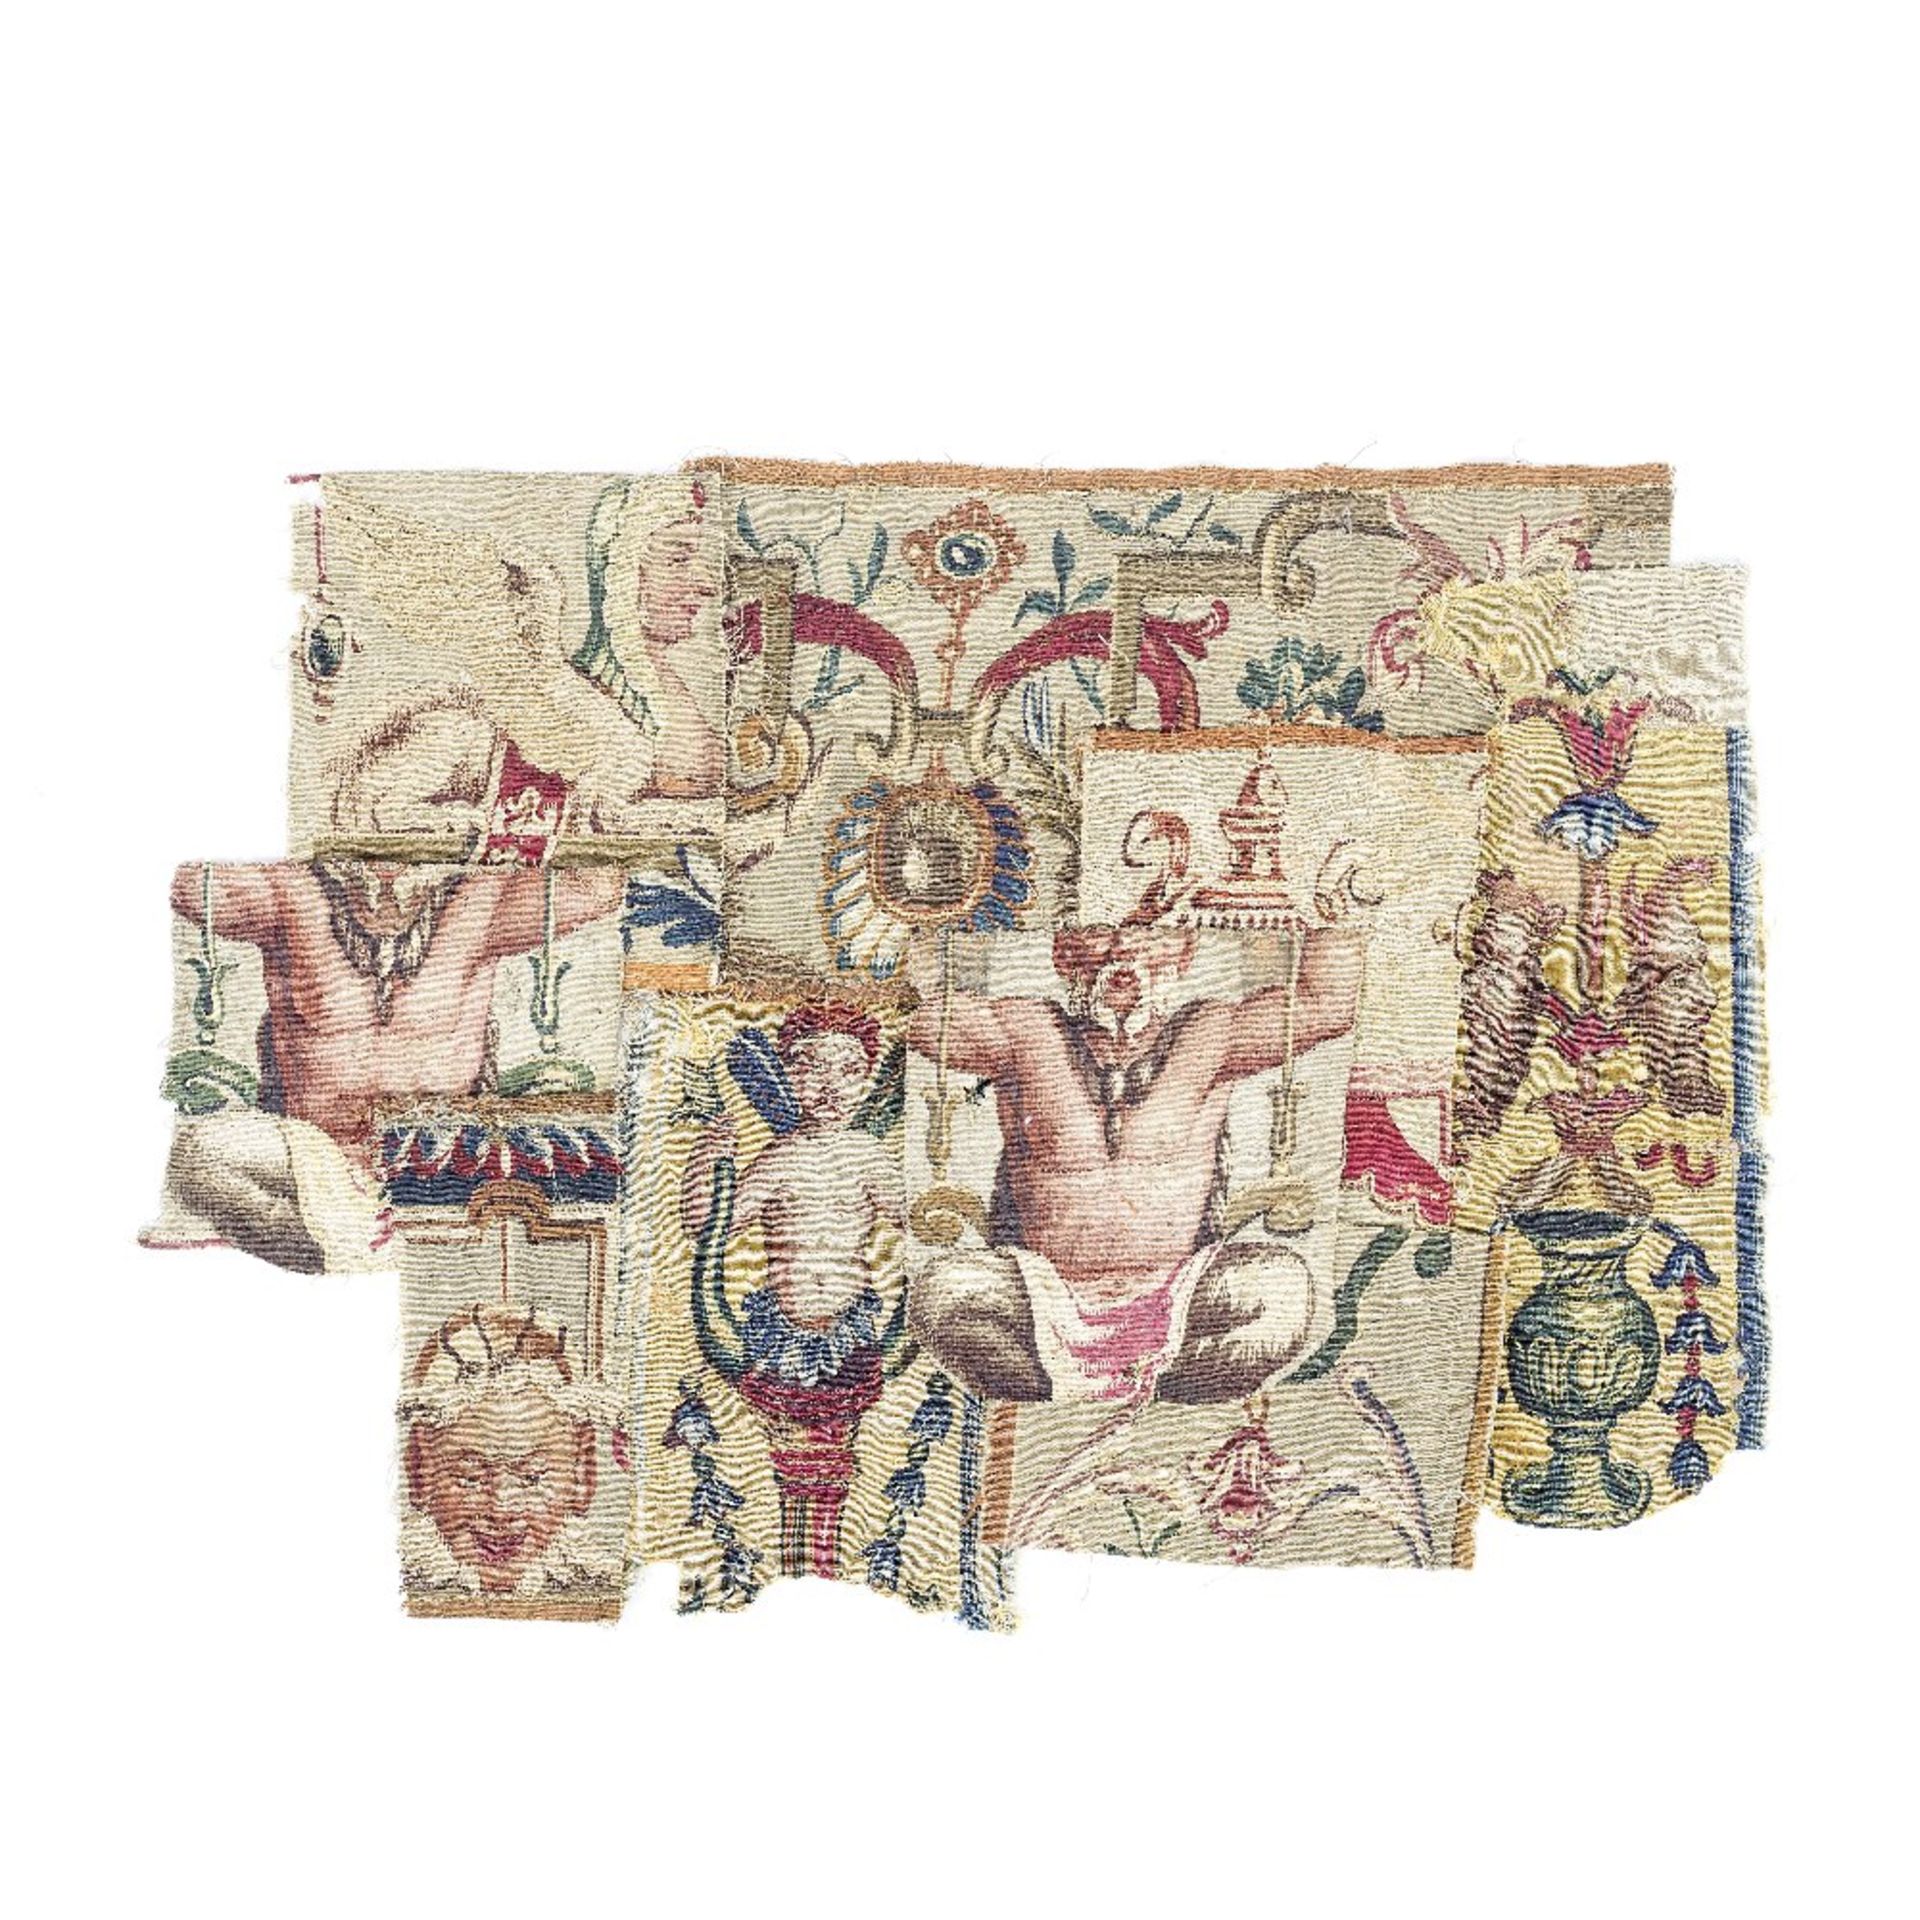 Fragments of Beauvais and Mortlake tapestry borders 17th century